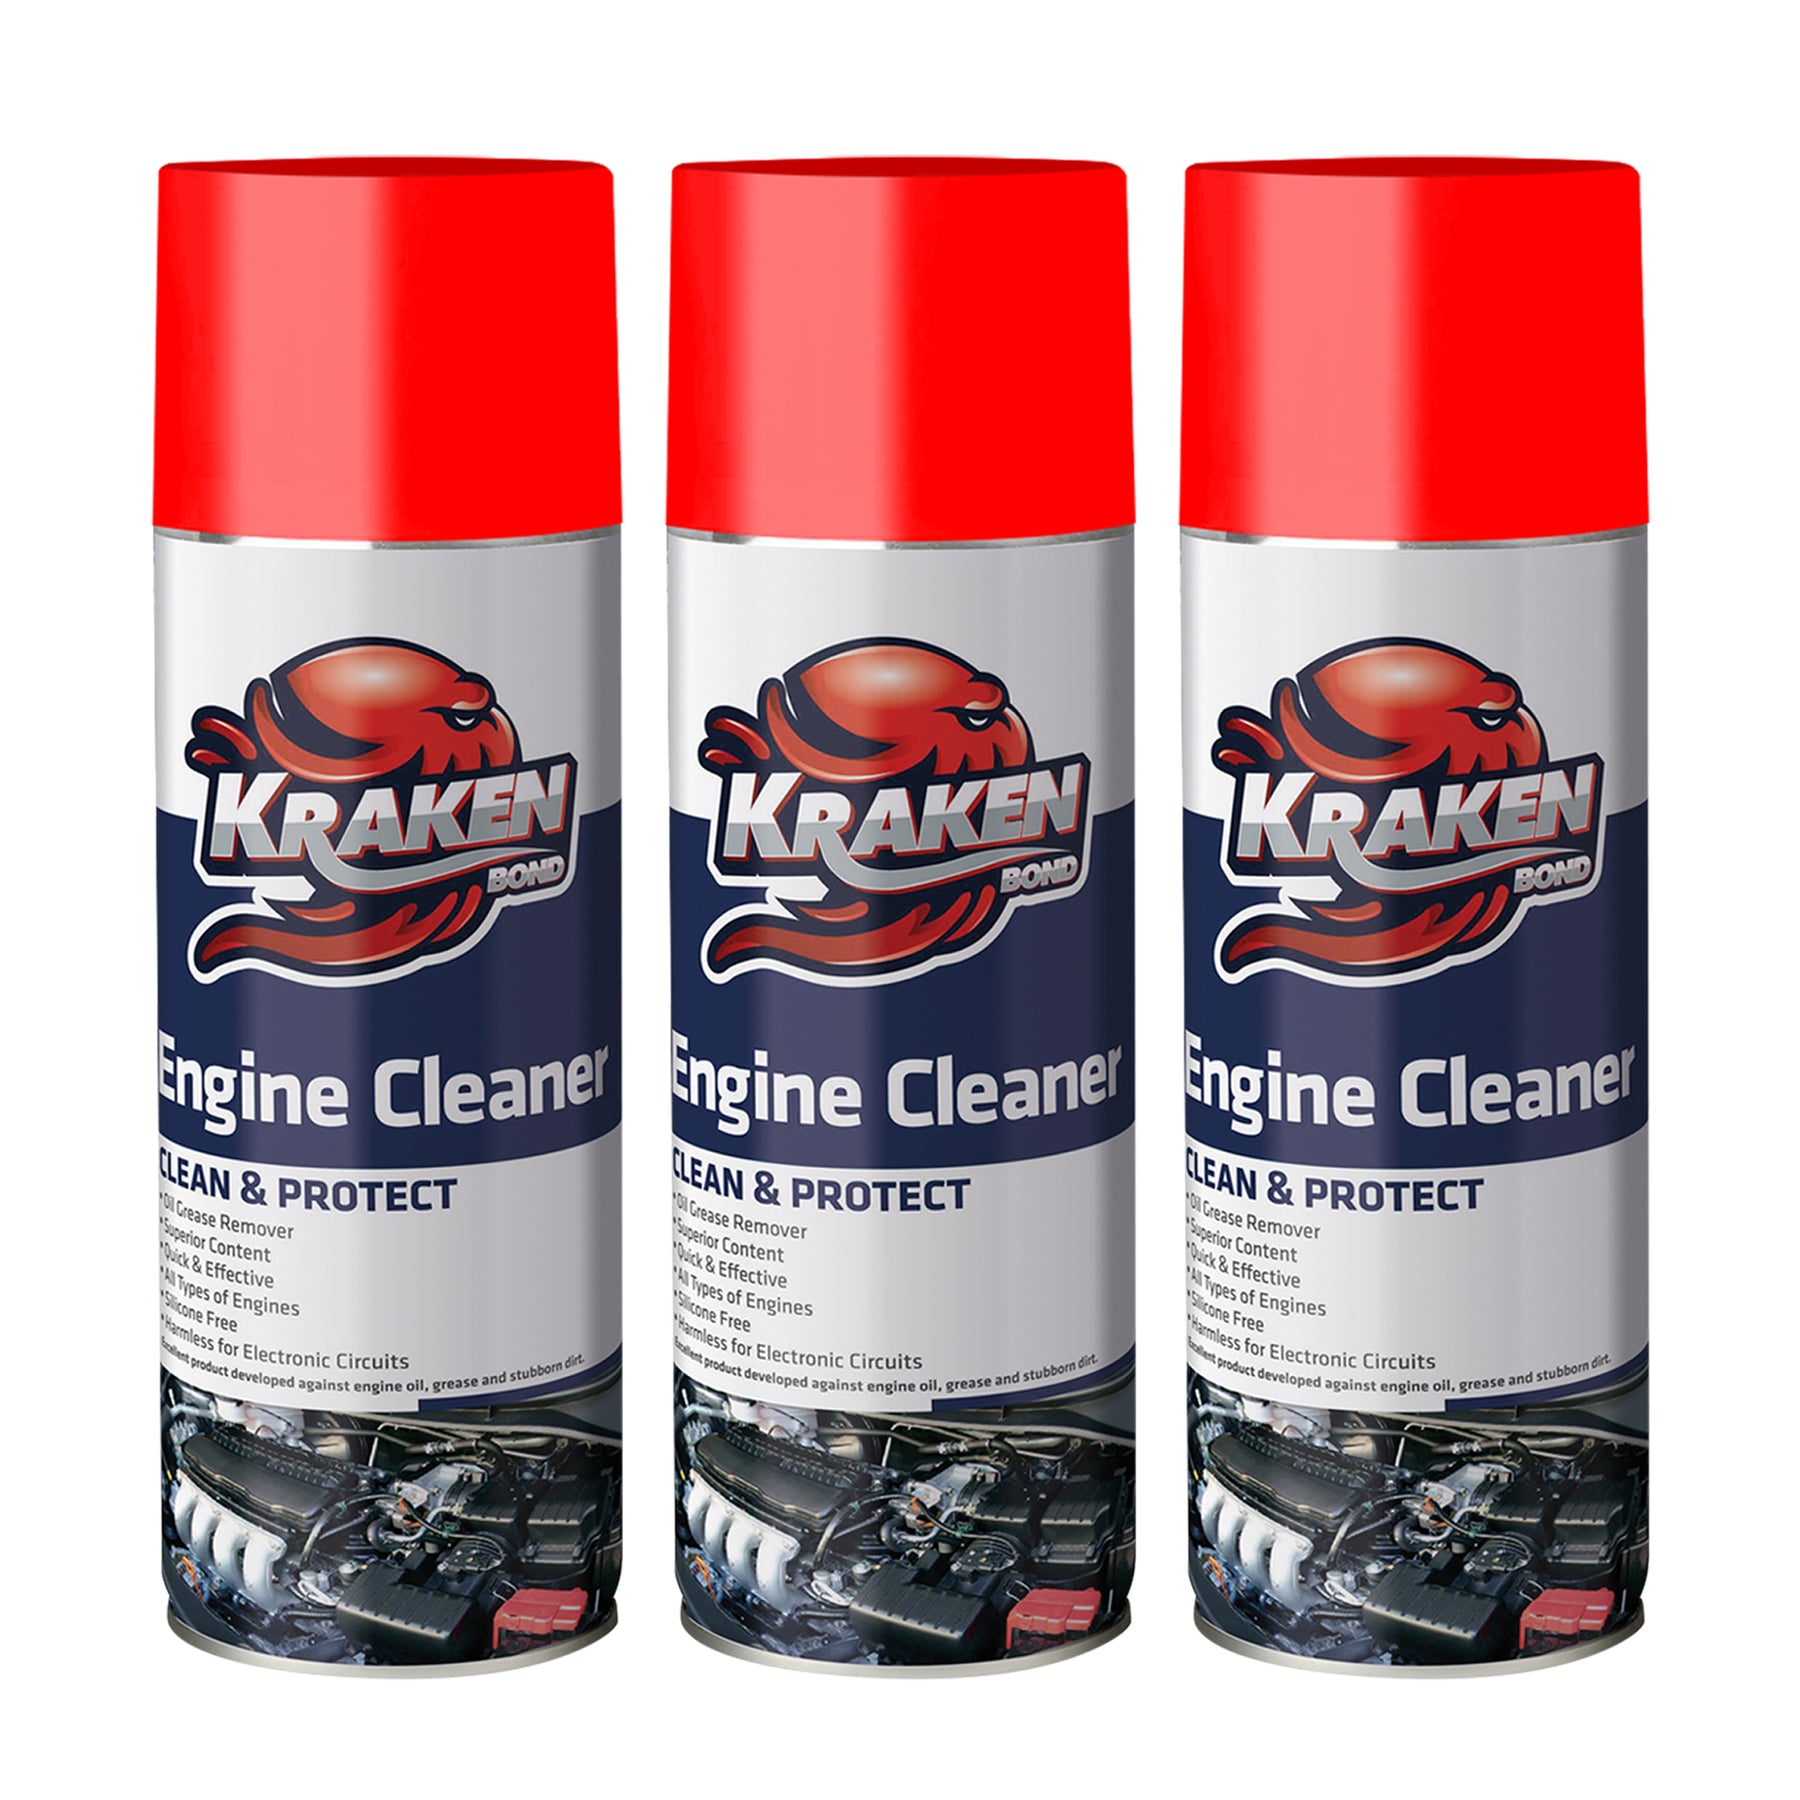 Car care products, Engine lubricant, Engine cleaner